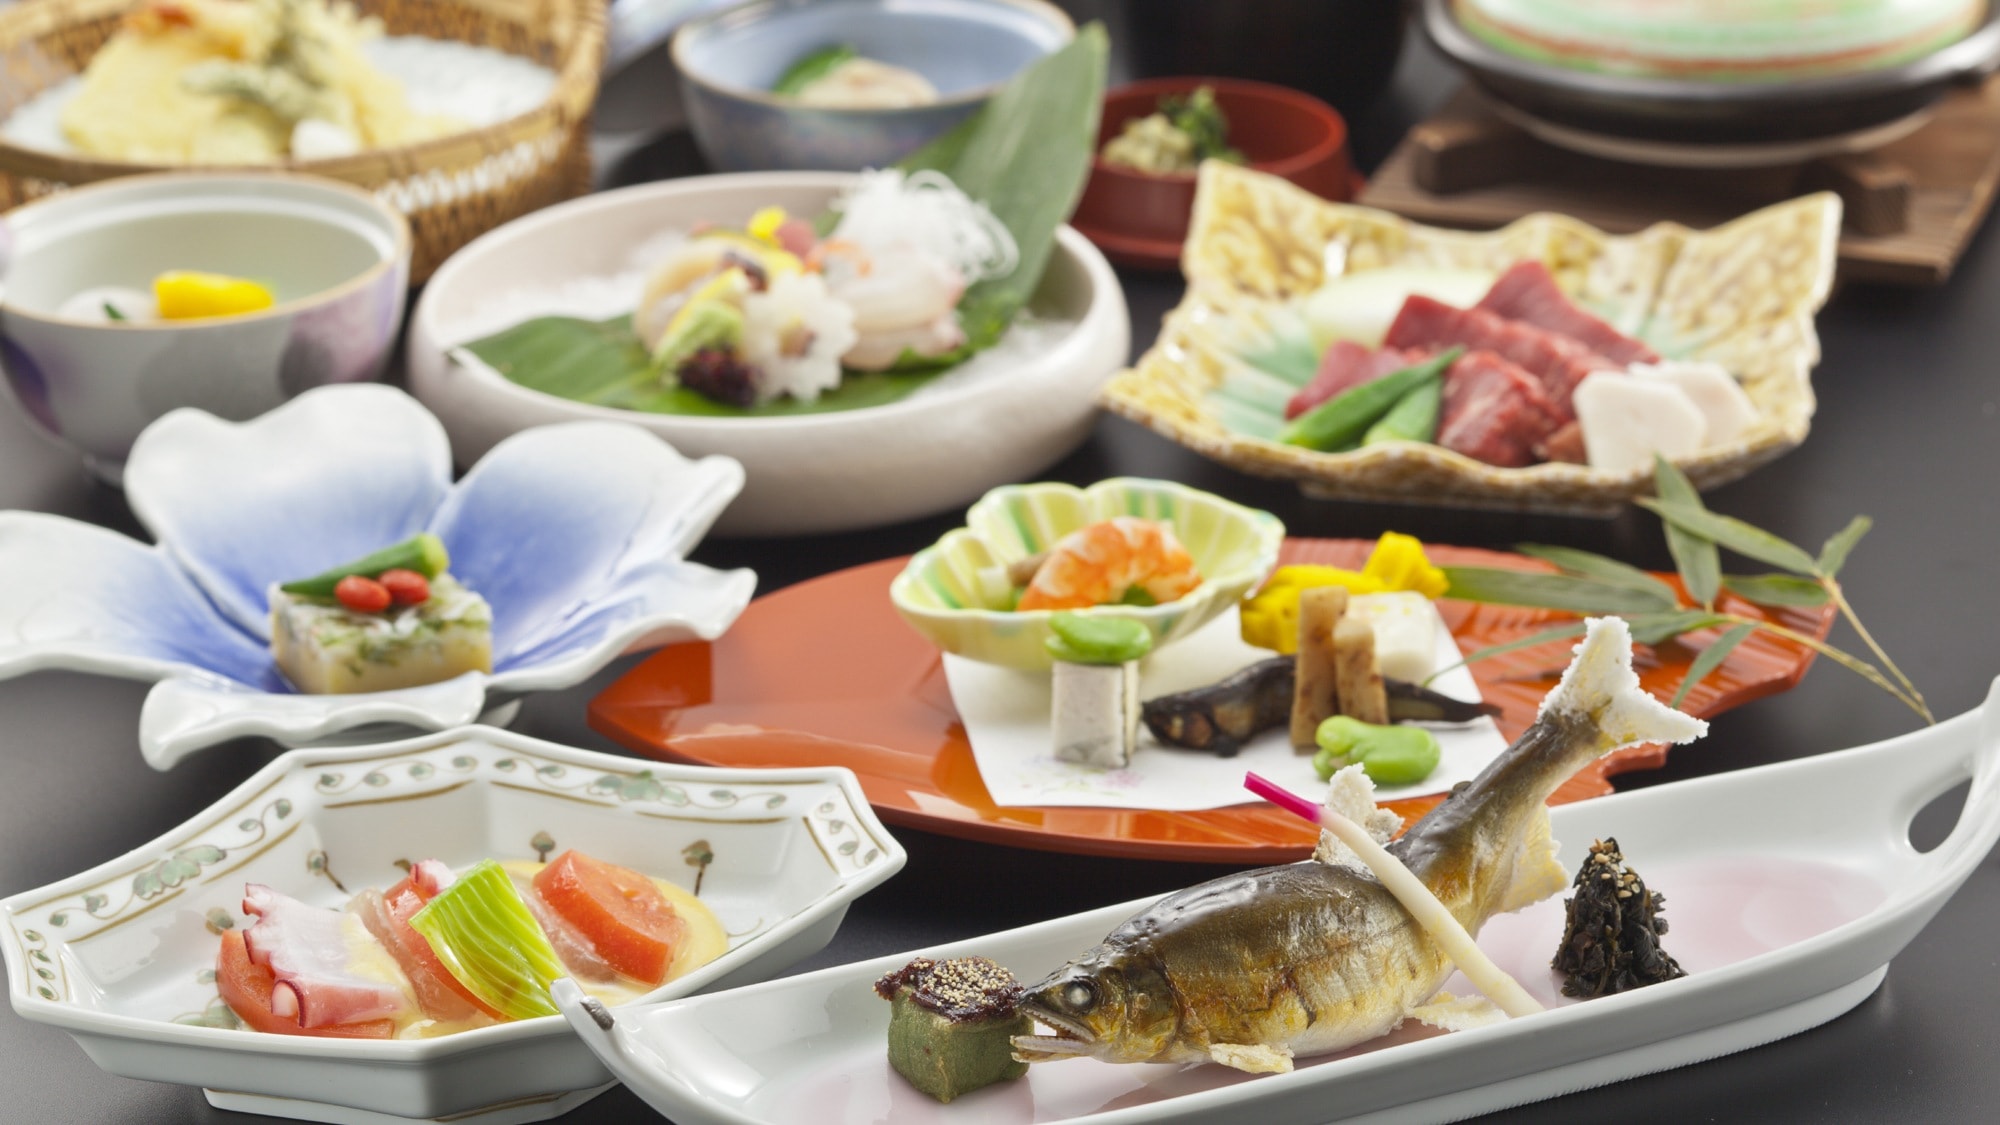 [Supper] We offer kaiseki meals with Kyoto-style seasoning and colorful appearance. (The photo is Utage Kaiseki)